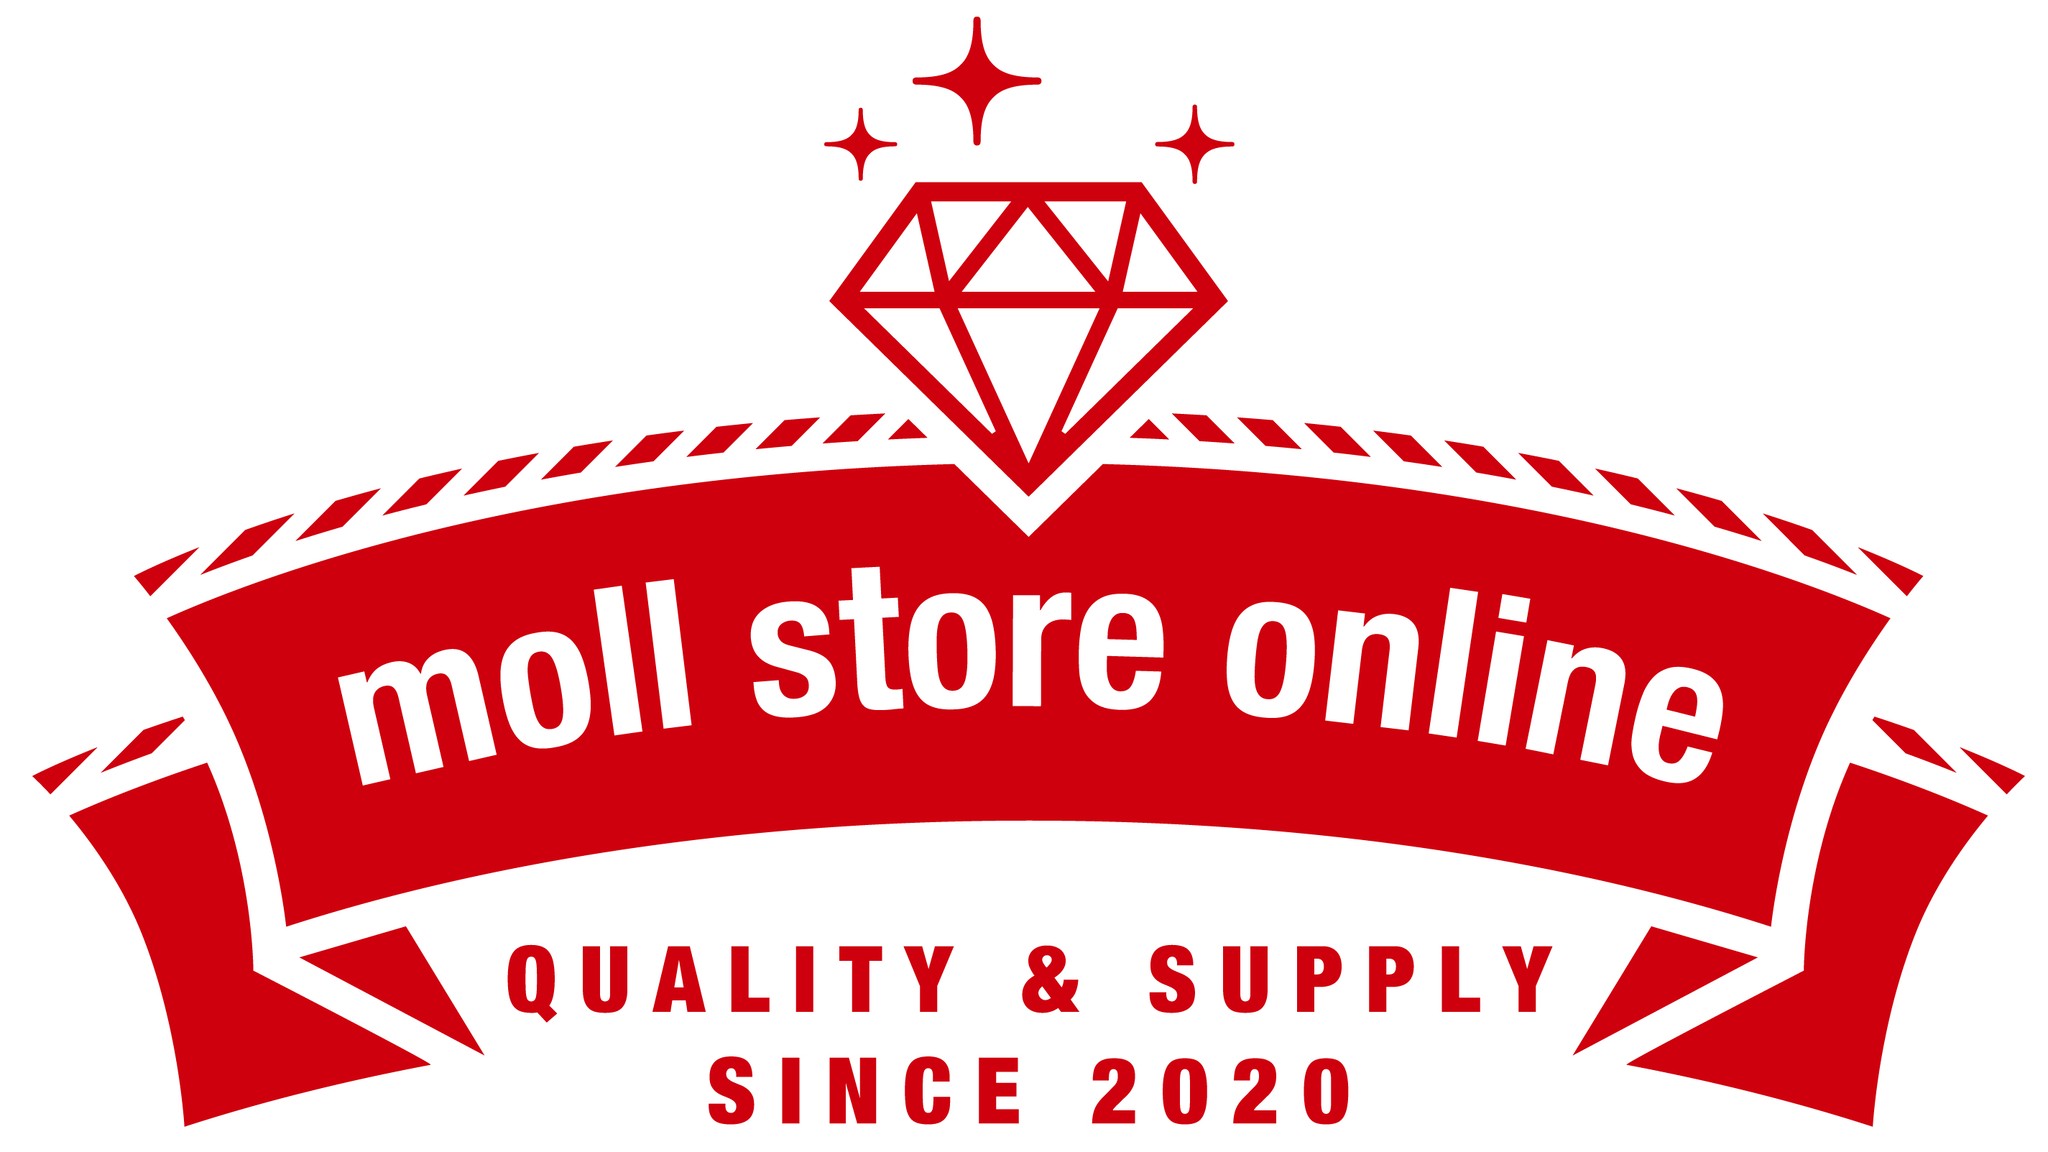 moll store online